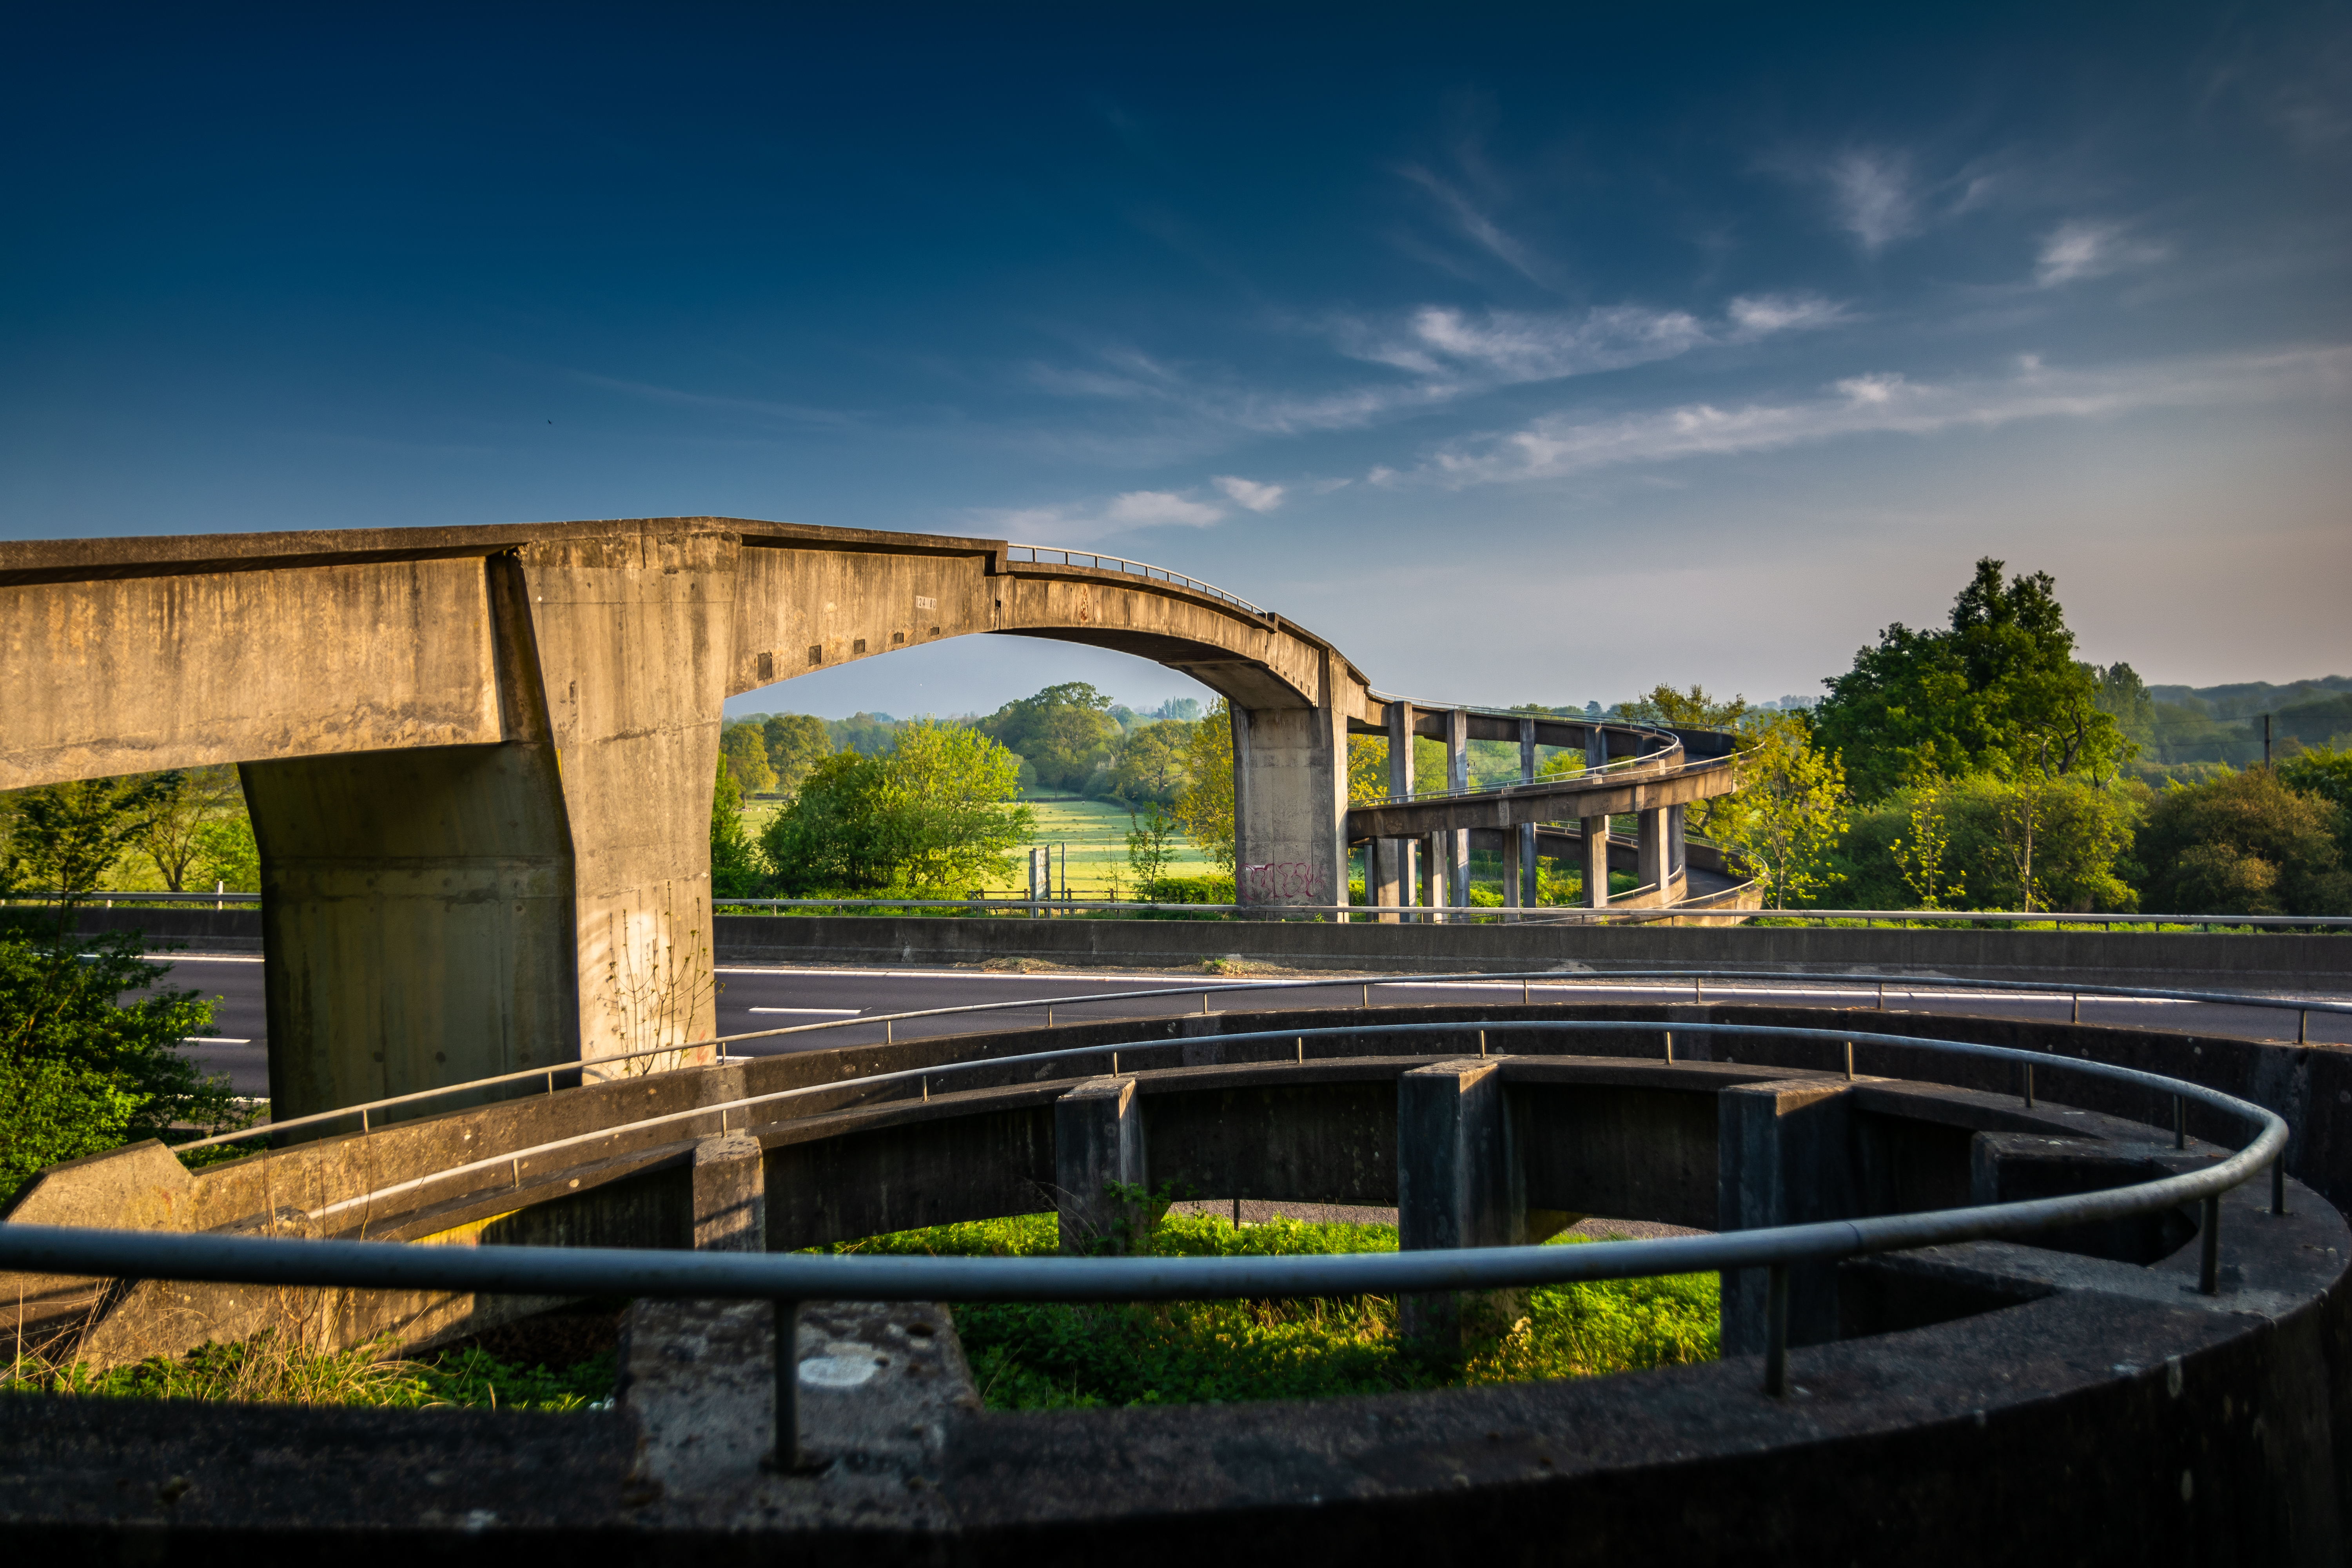 helter skelter bridge spanning the M4 at Coate in early morning sunlight.